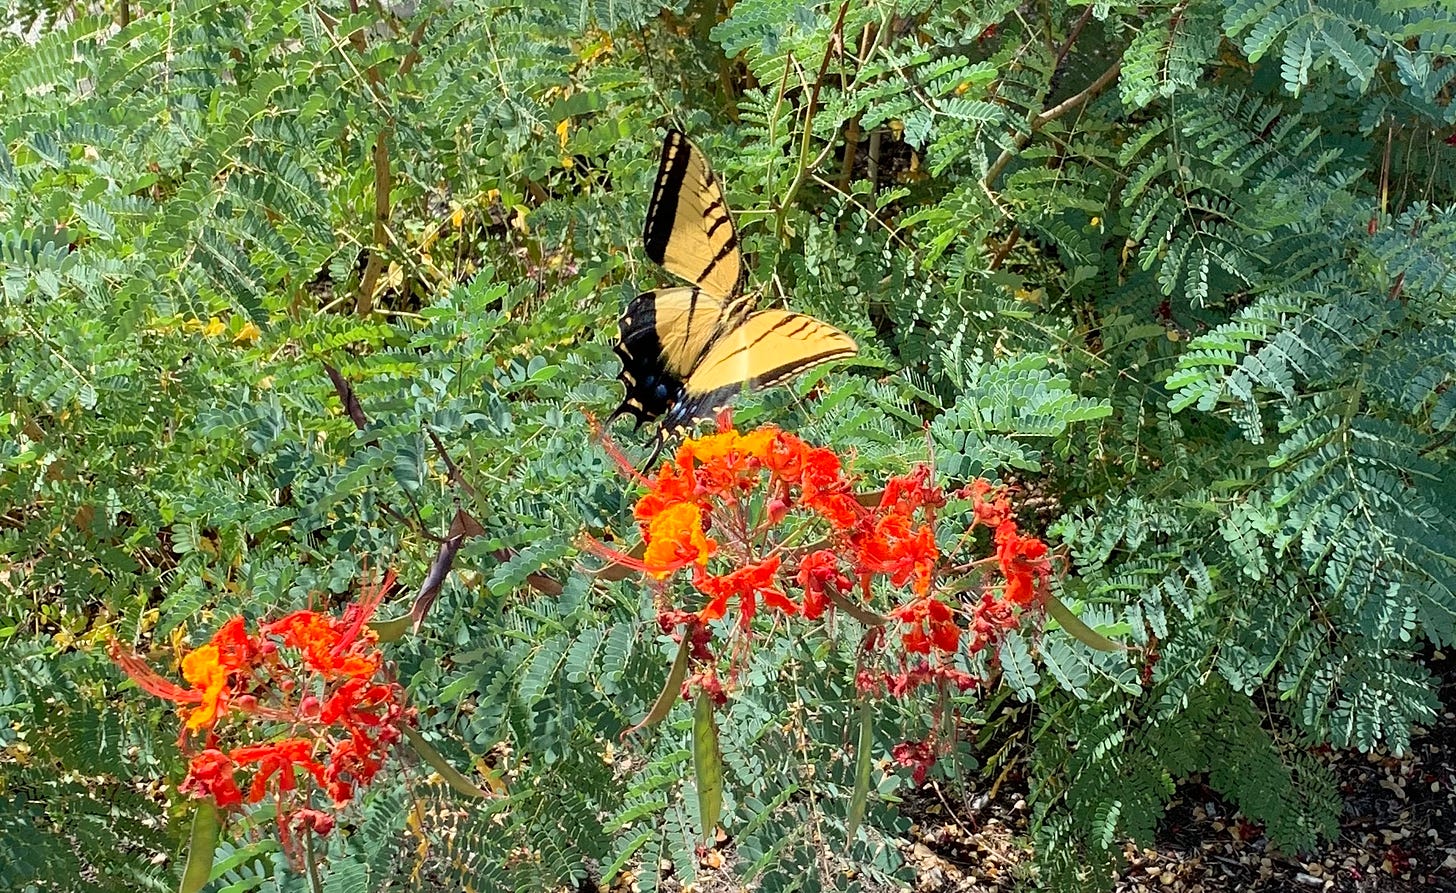 Yellow and black swallowtail butterfly flying above orange flowers surrounded by green leaves